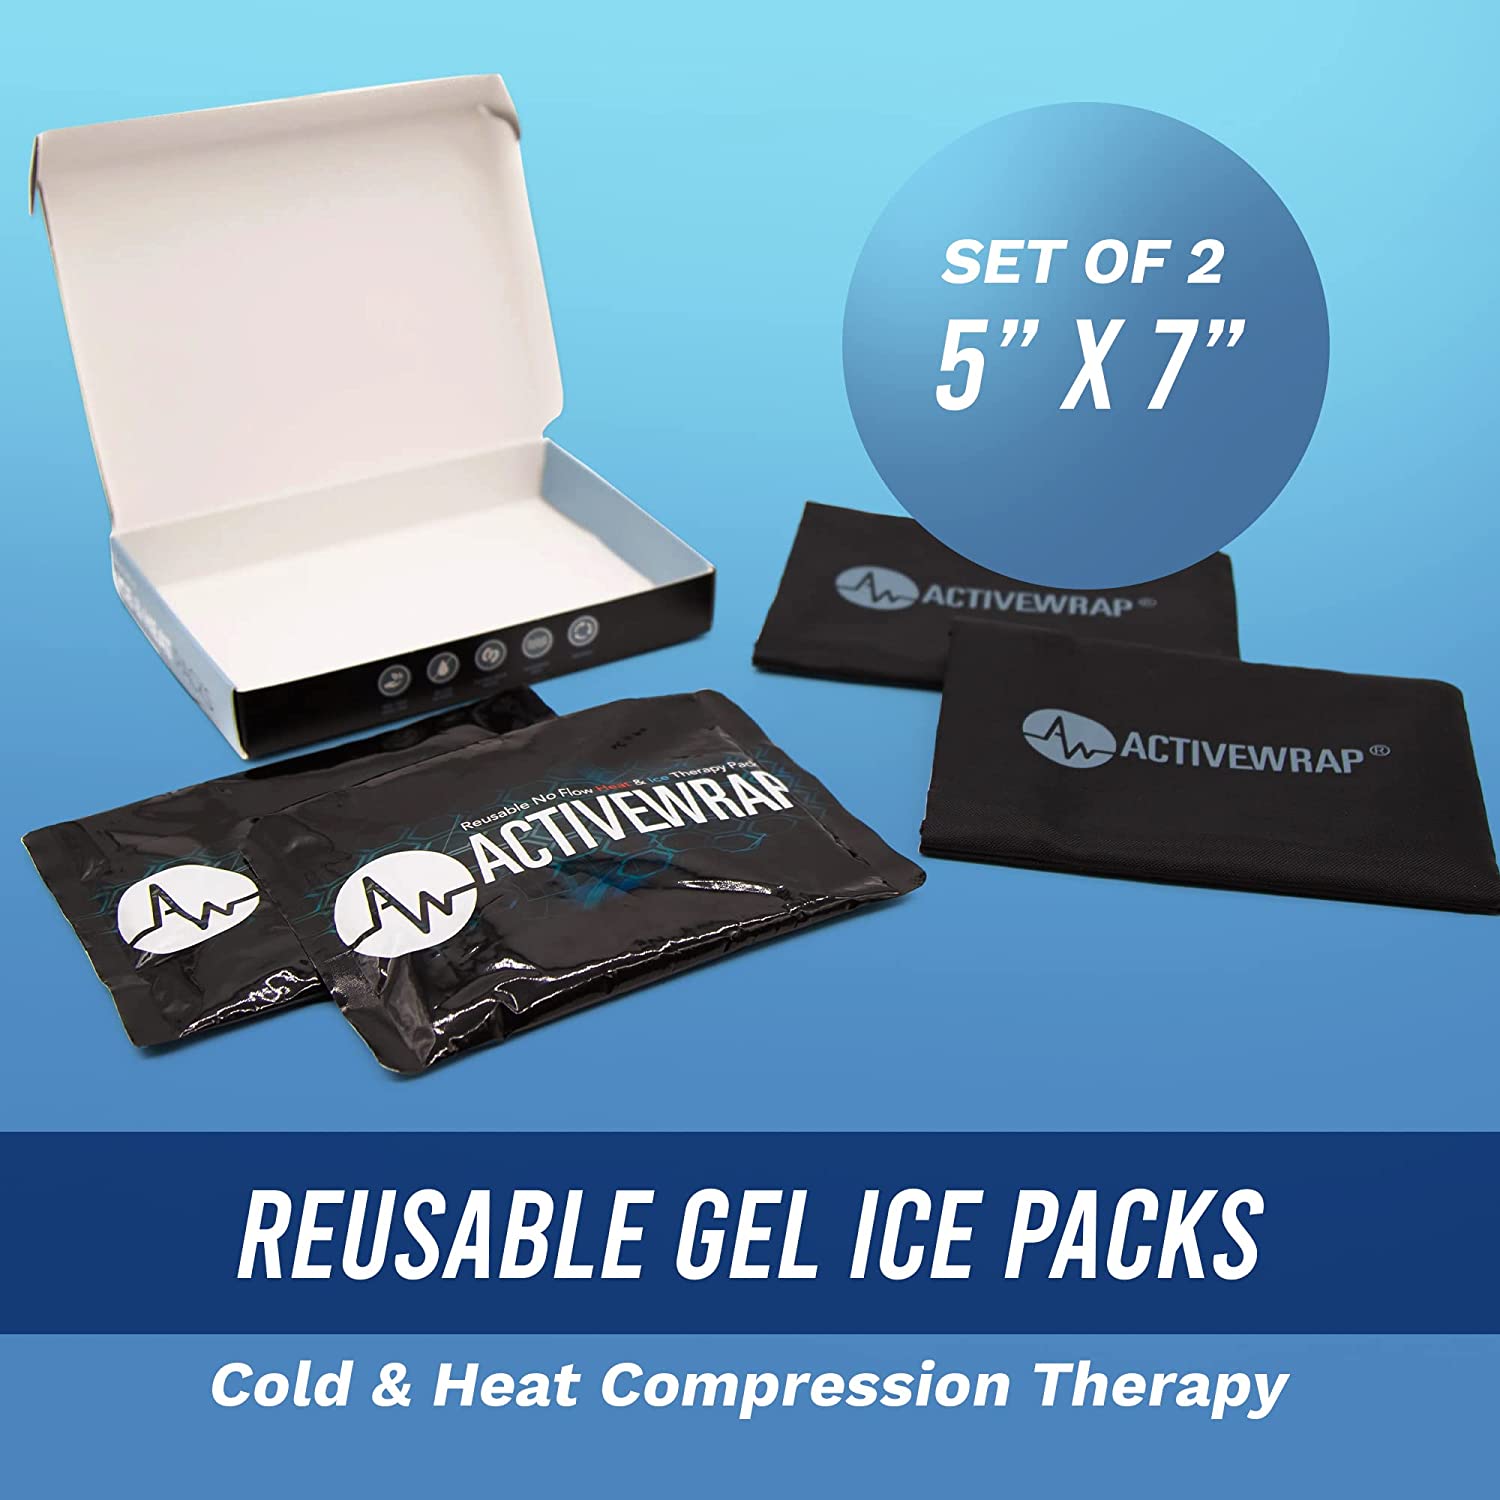 Reusable Cold & Hot Therapy Gel Pack + Tips on When to Ice vs. Heat